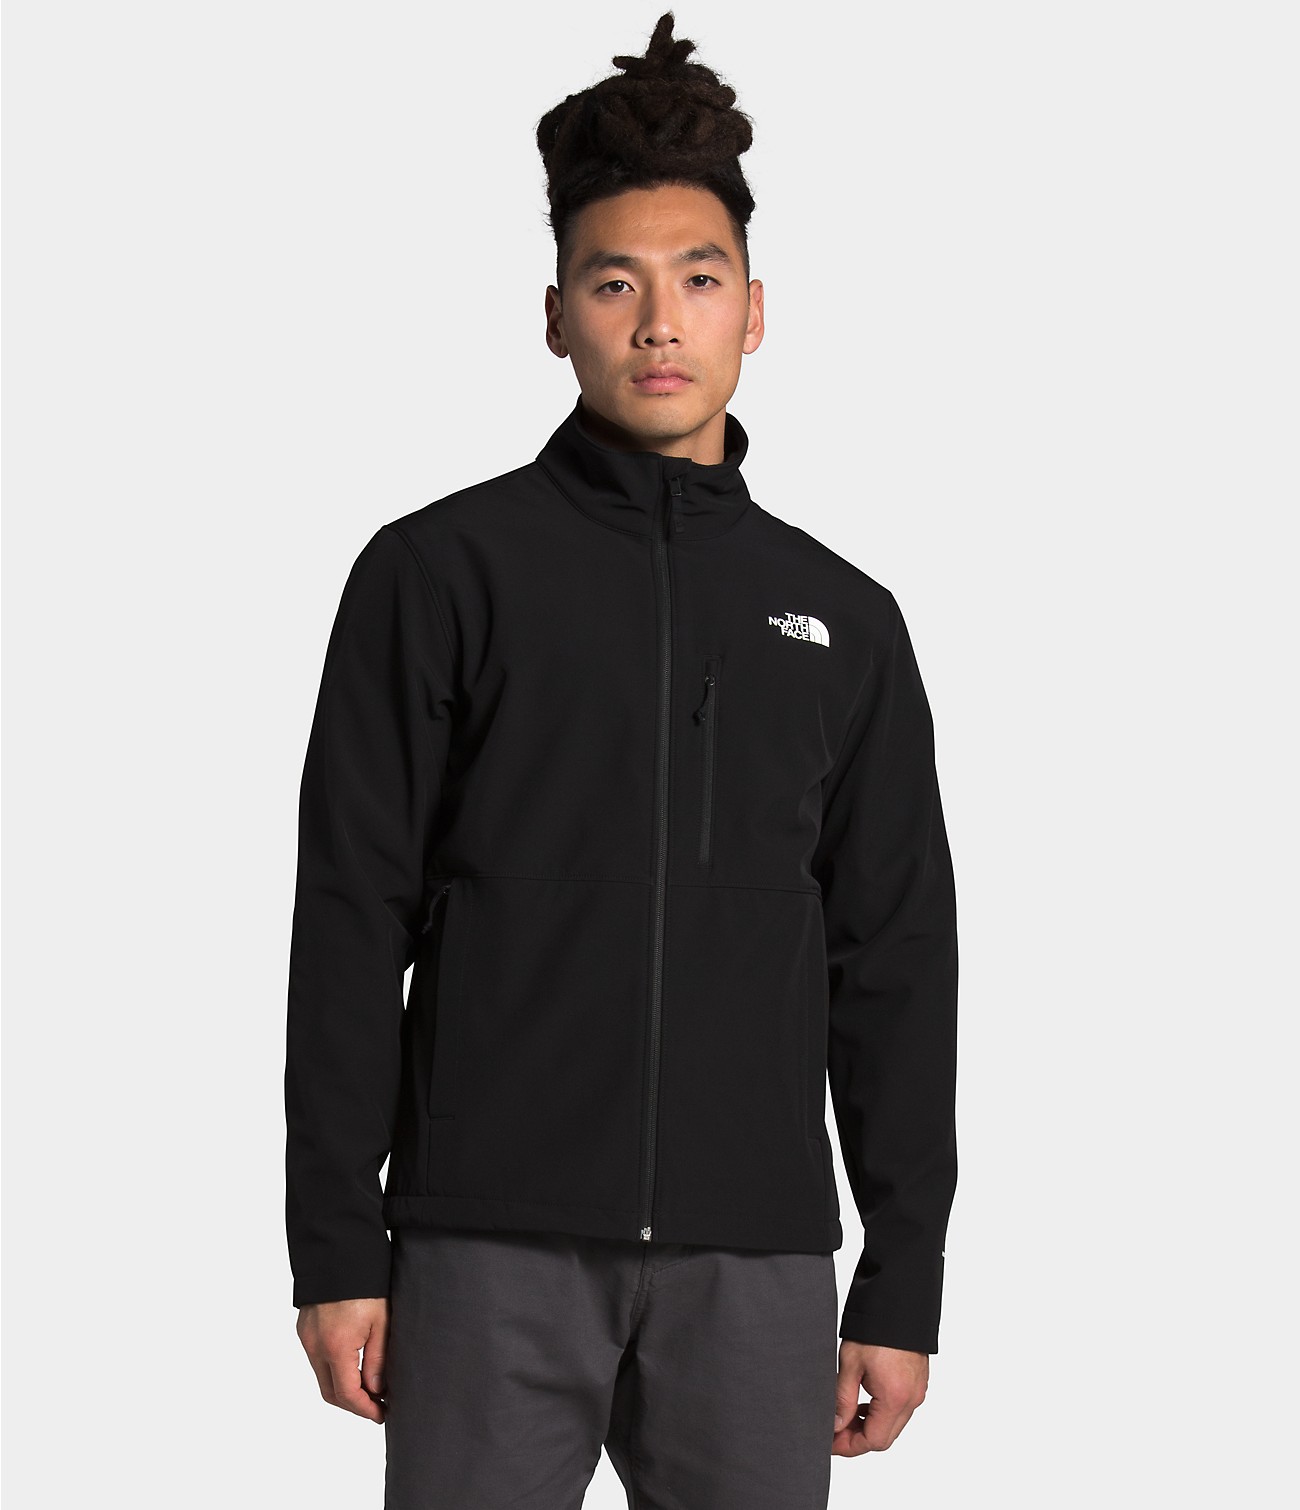 Unlock Wilderness' choice in the Carhartt Vs North Face comparison, the Apex Bionic Jacket by The North Face